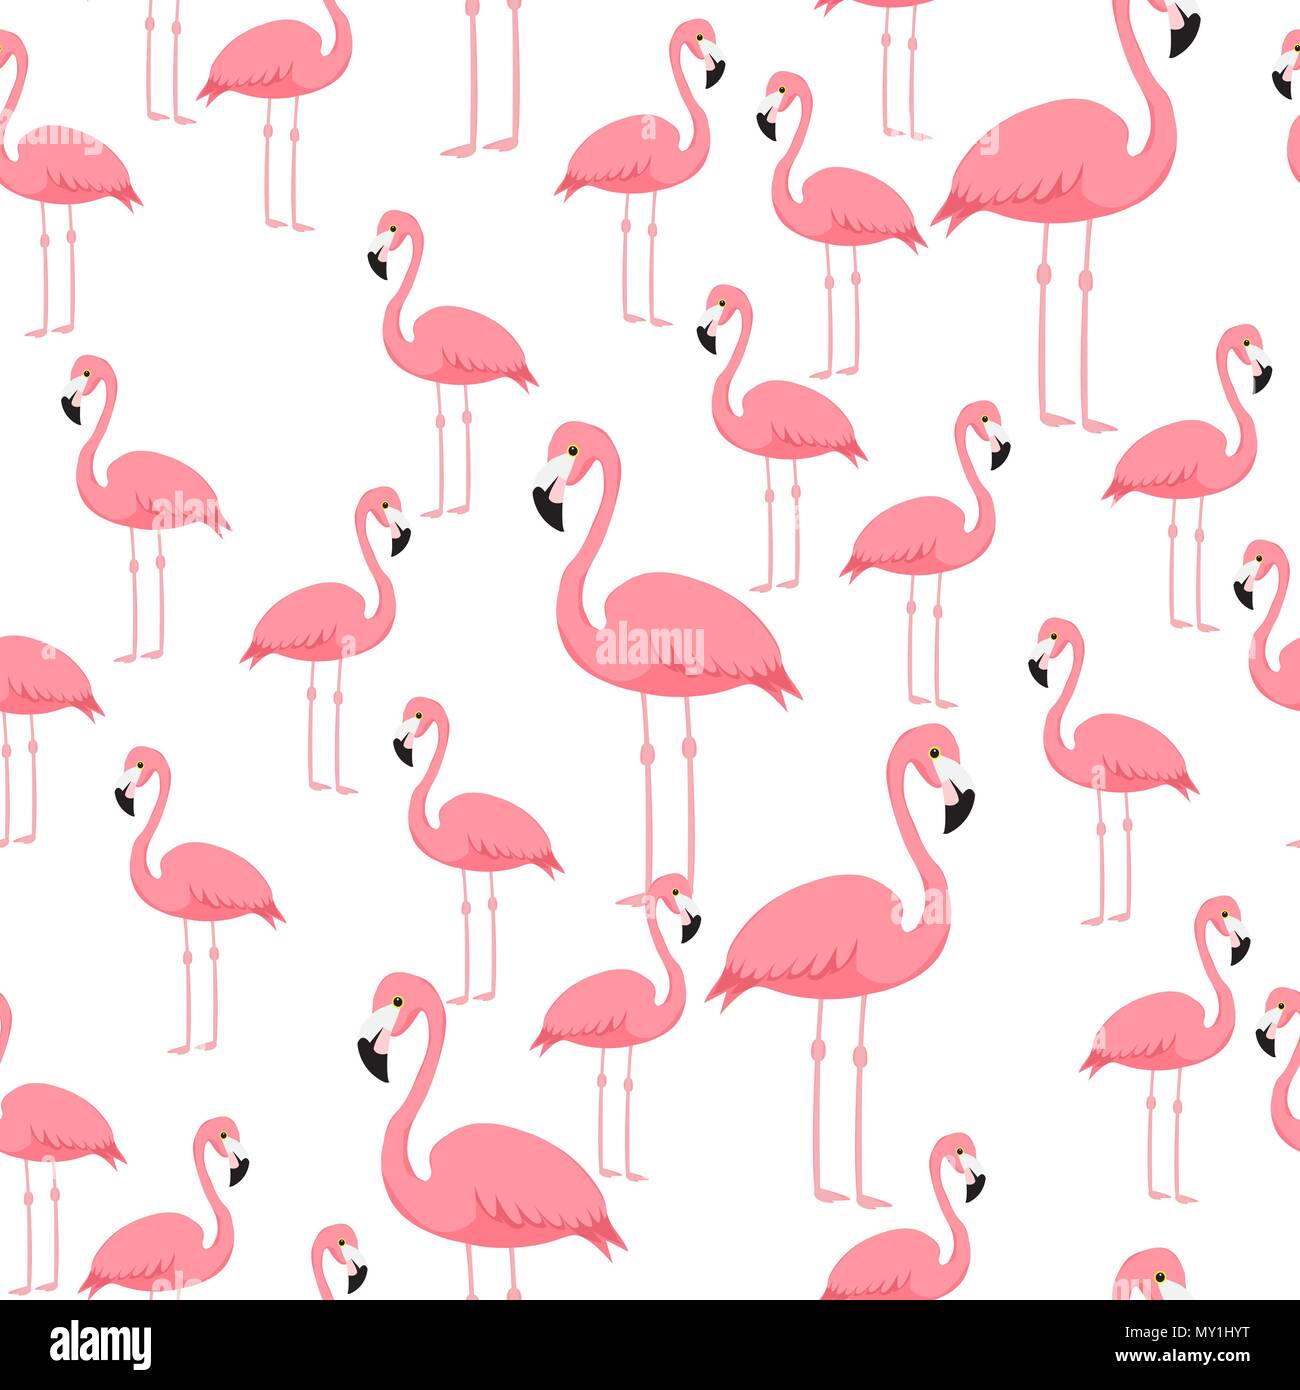 Download Cute Flamingo Wallpapers HD 801117apk for Android  apkdlin